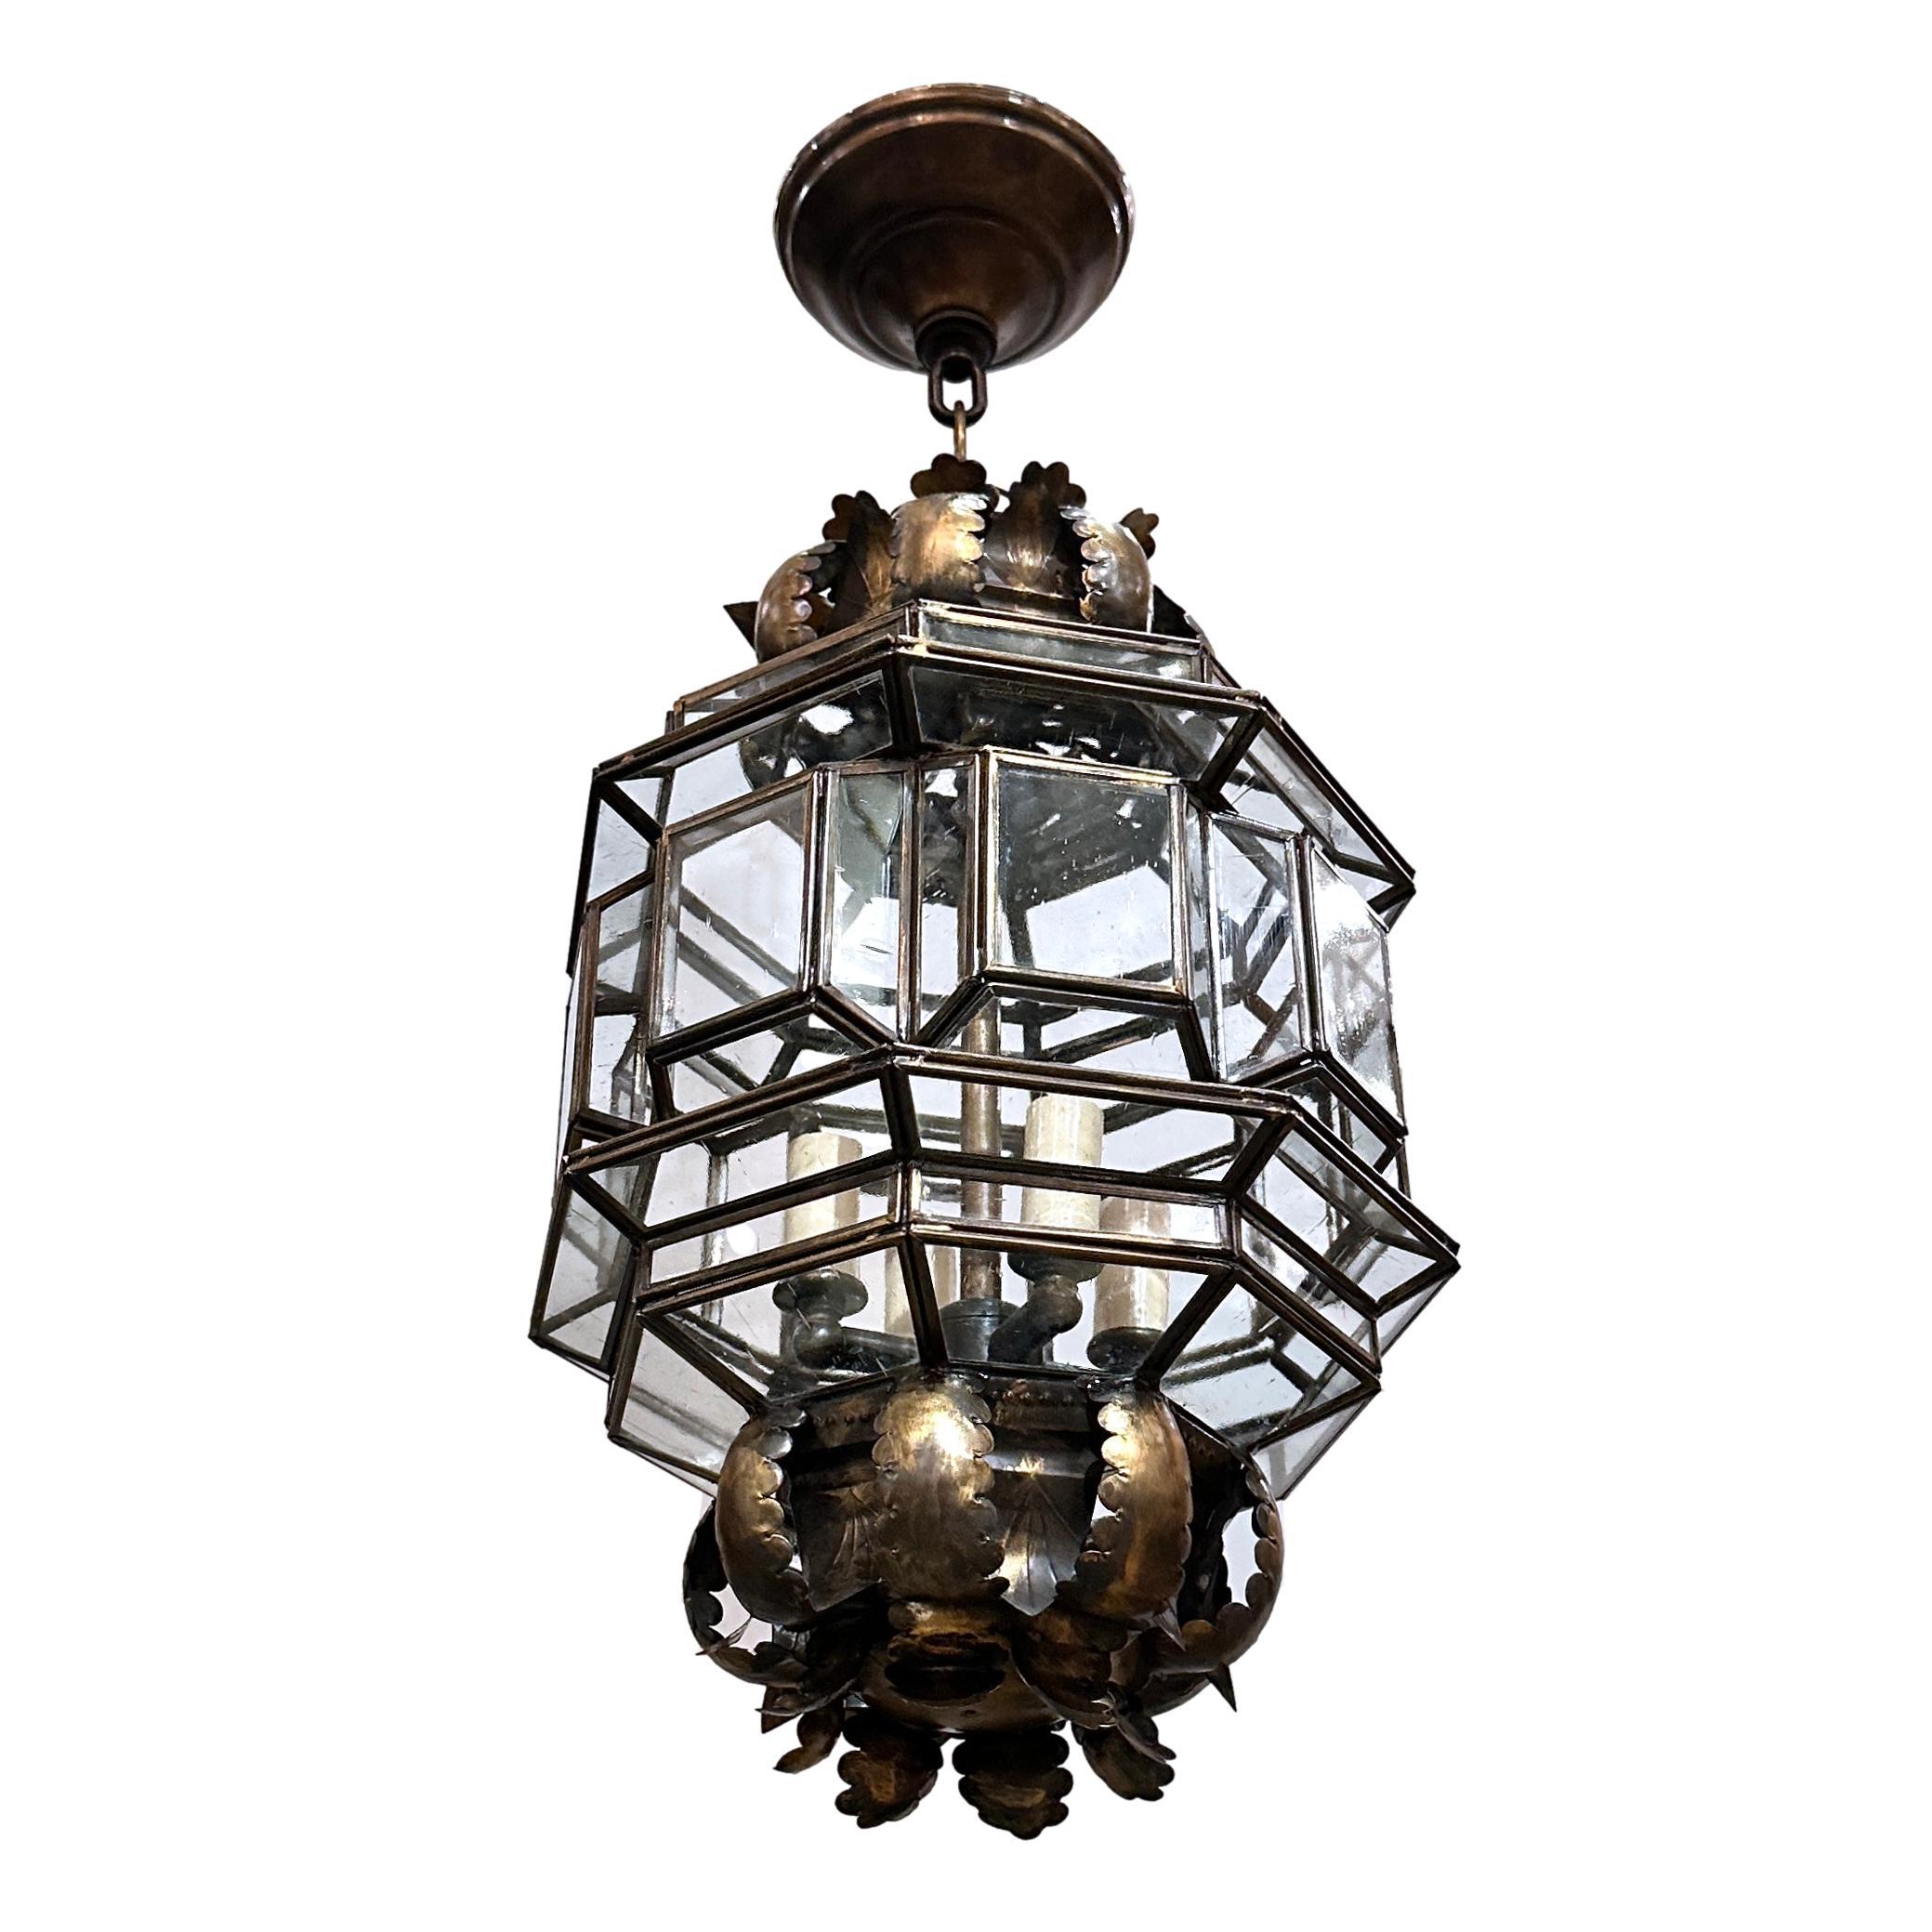 Set of 4 Italian circa 1960's lanterns with patinated gilt finish. Sold individually.

Measurements:
Height of body: 18